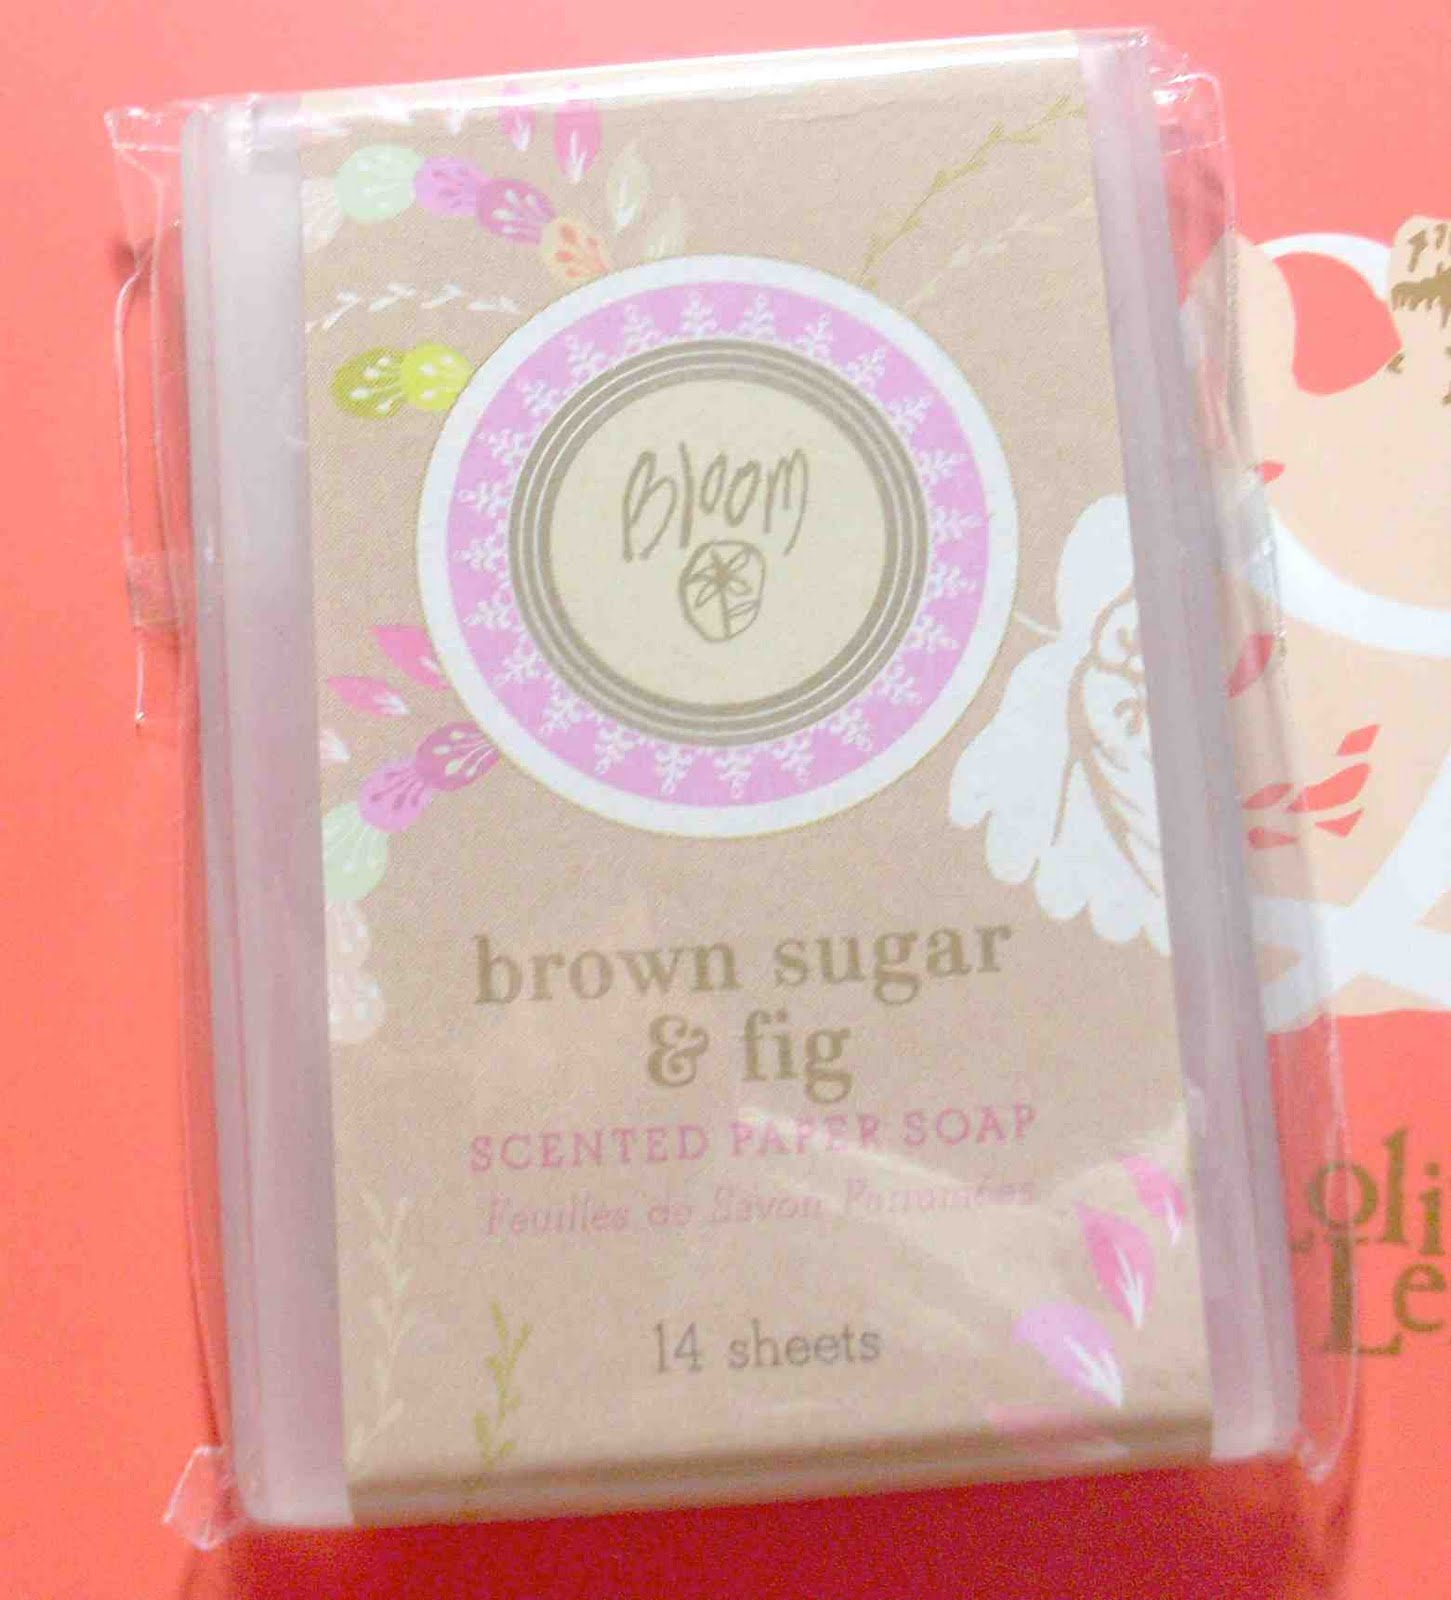 Really thin soap which smells more like caramelized sugar and vanilla.